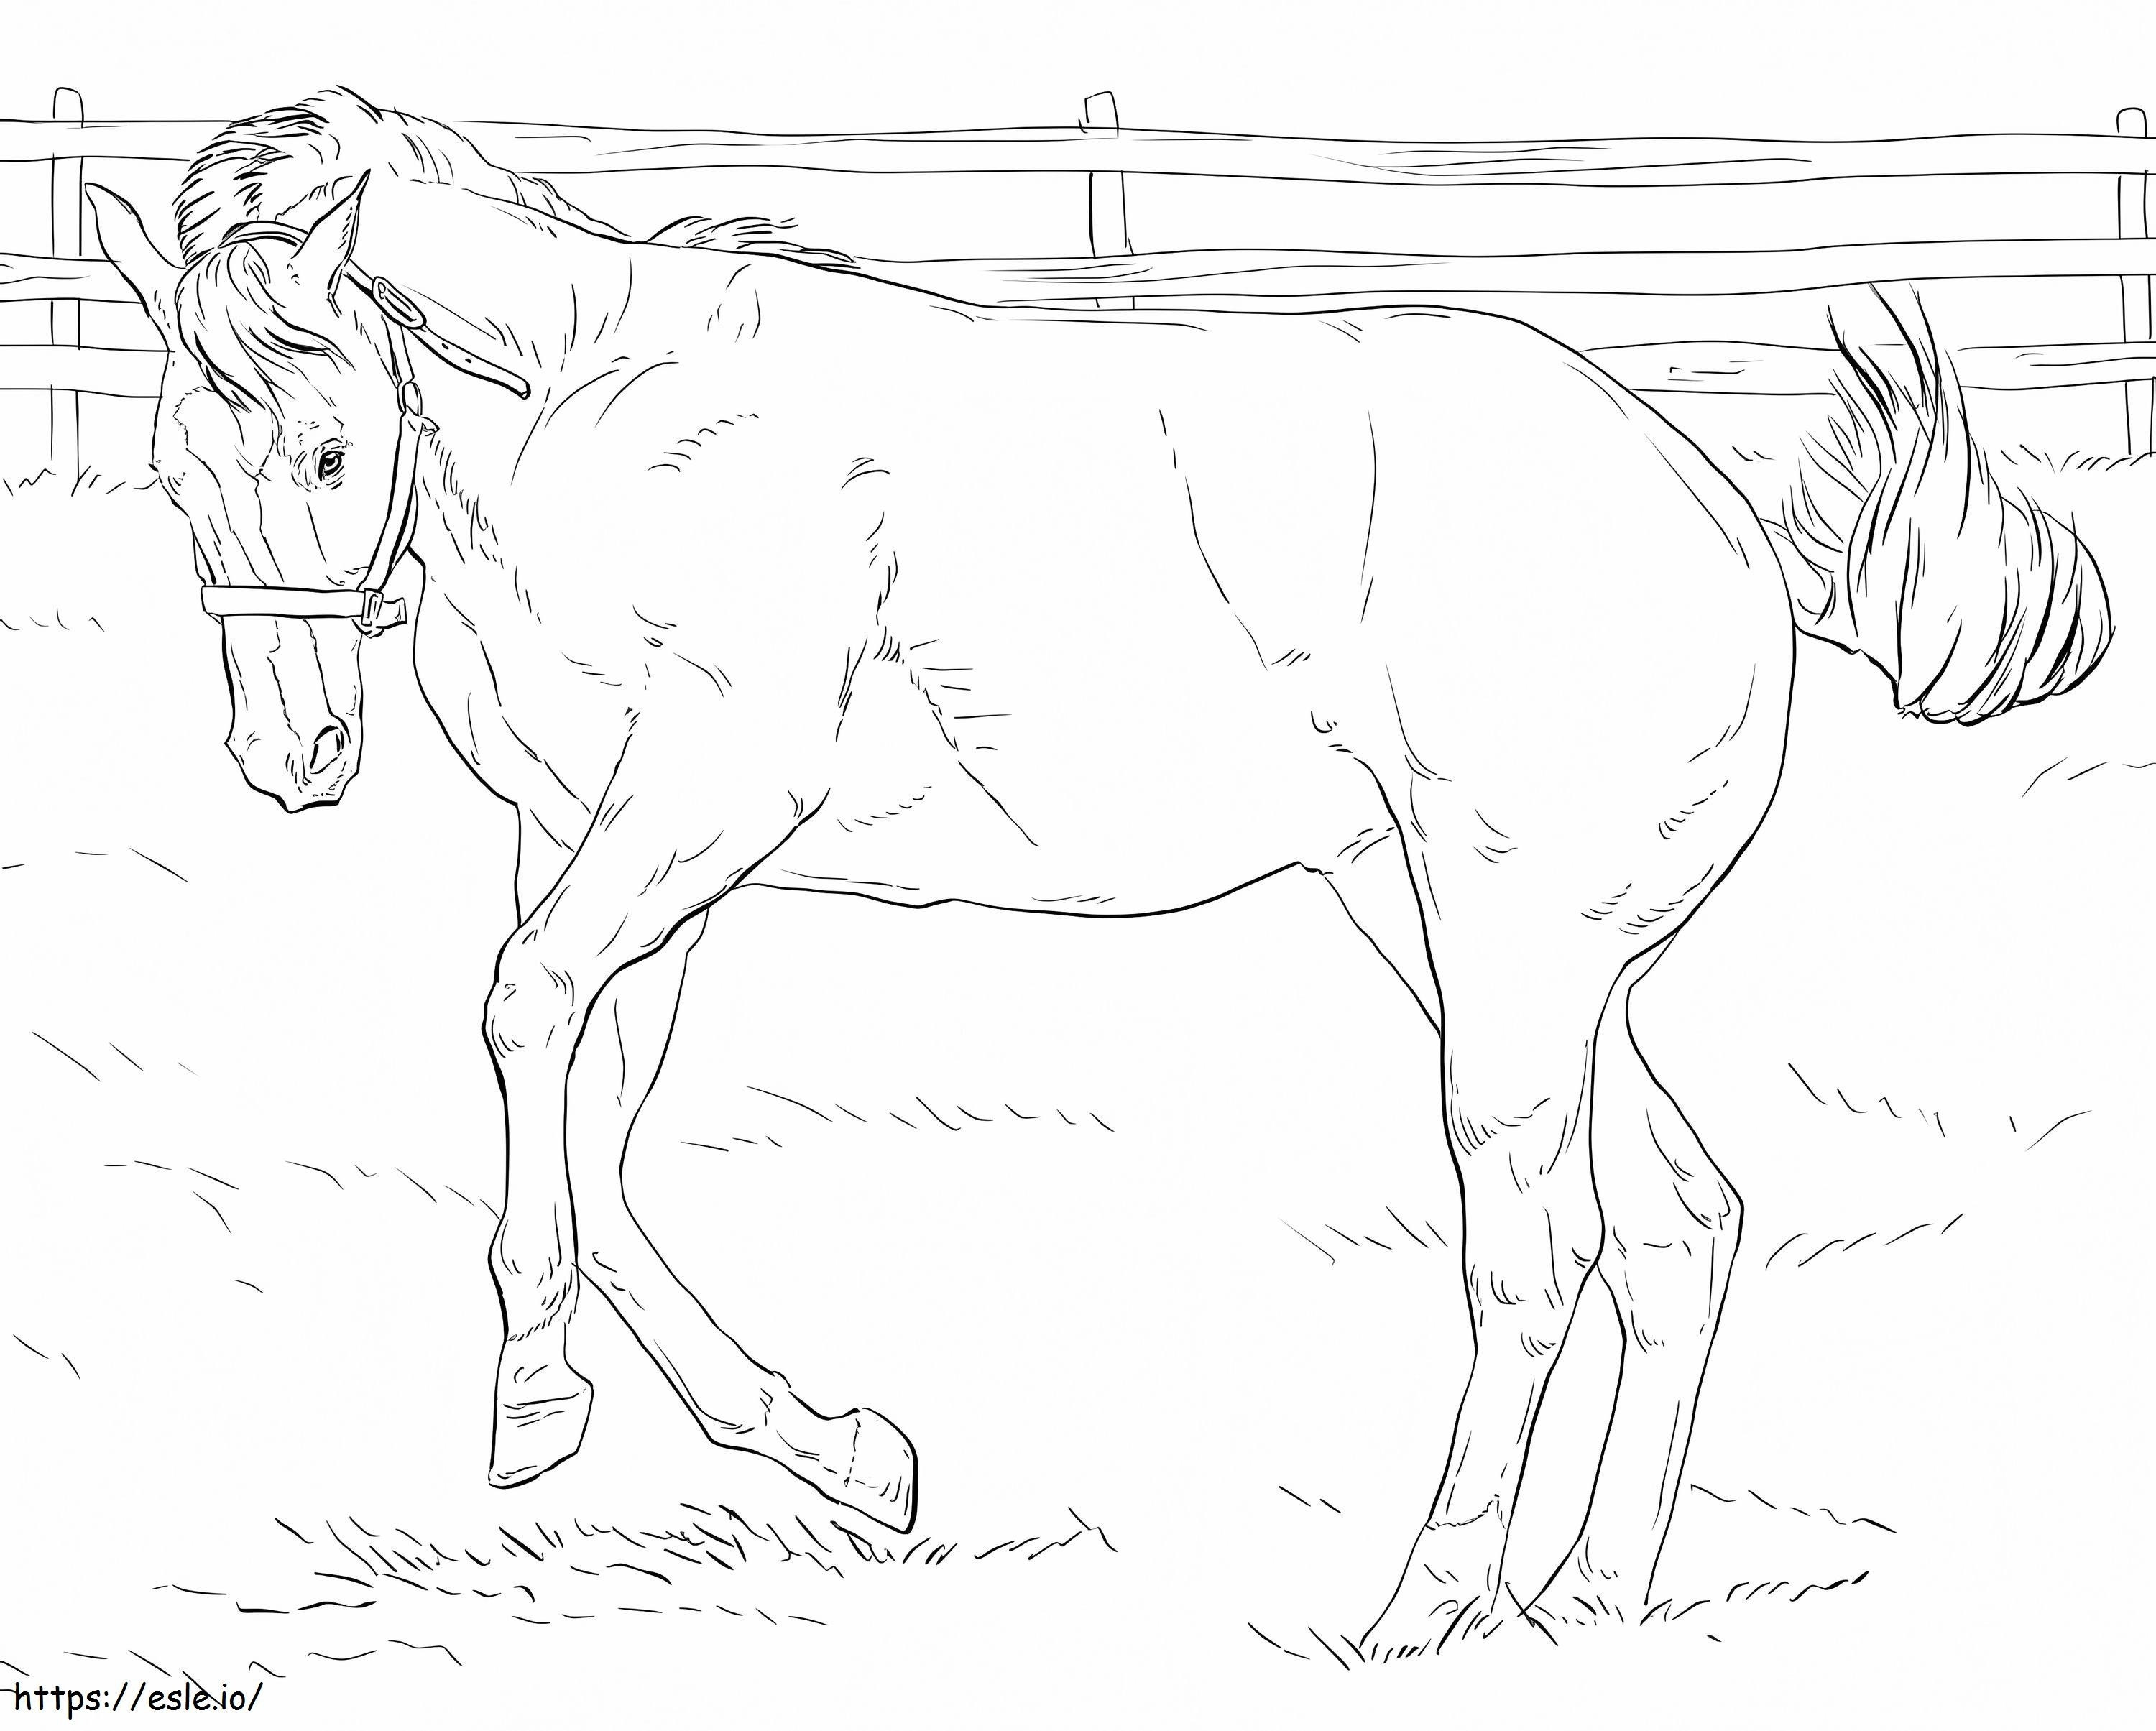 Bucking Horse 1 coloring page